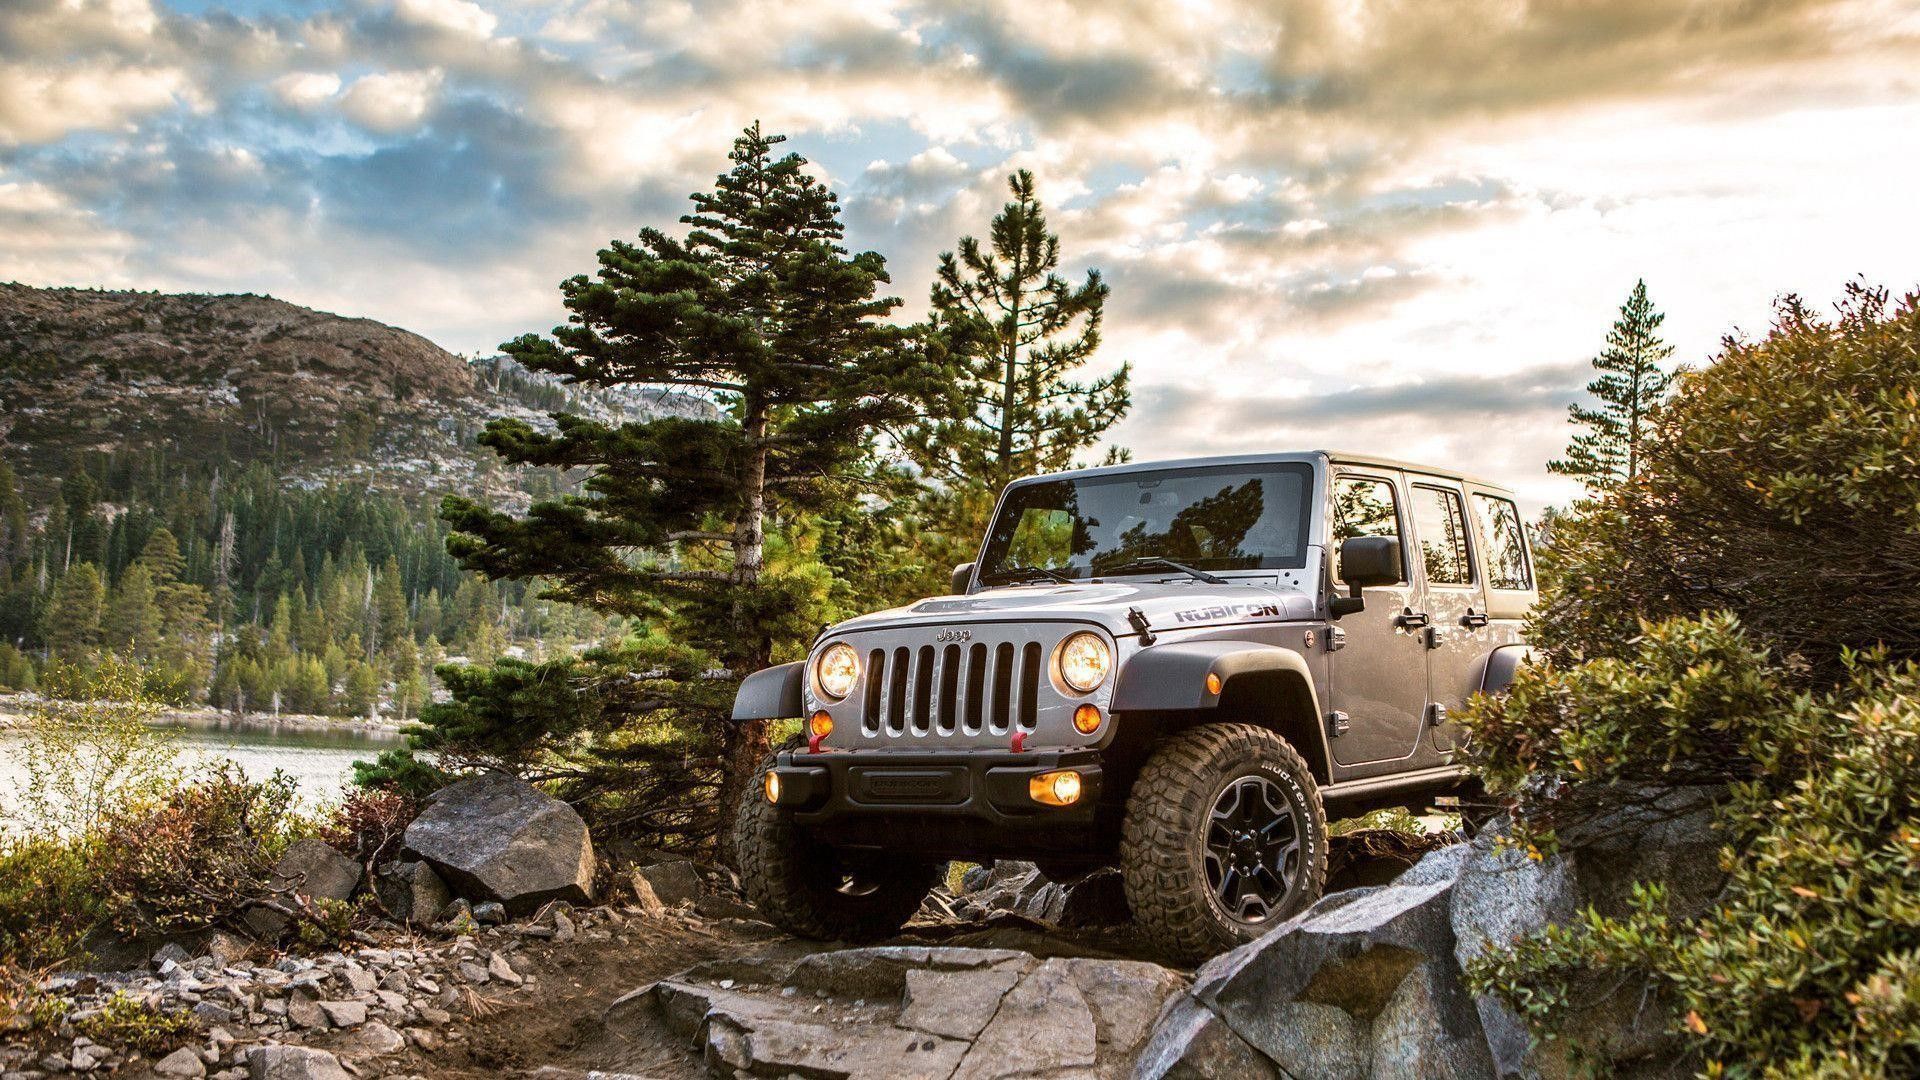 Here’s The Evolution Of The Jeep Wrangler